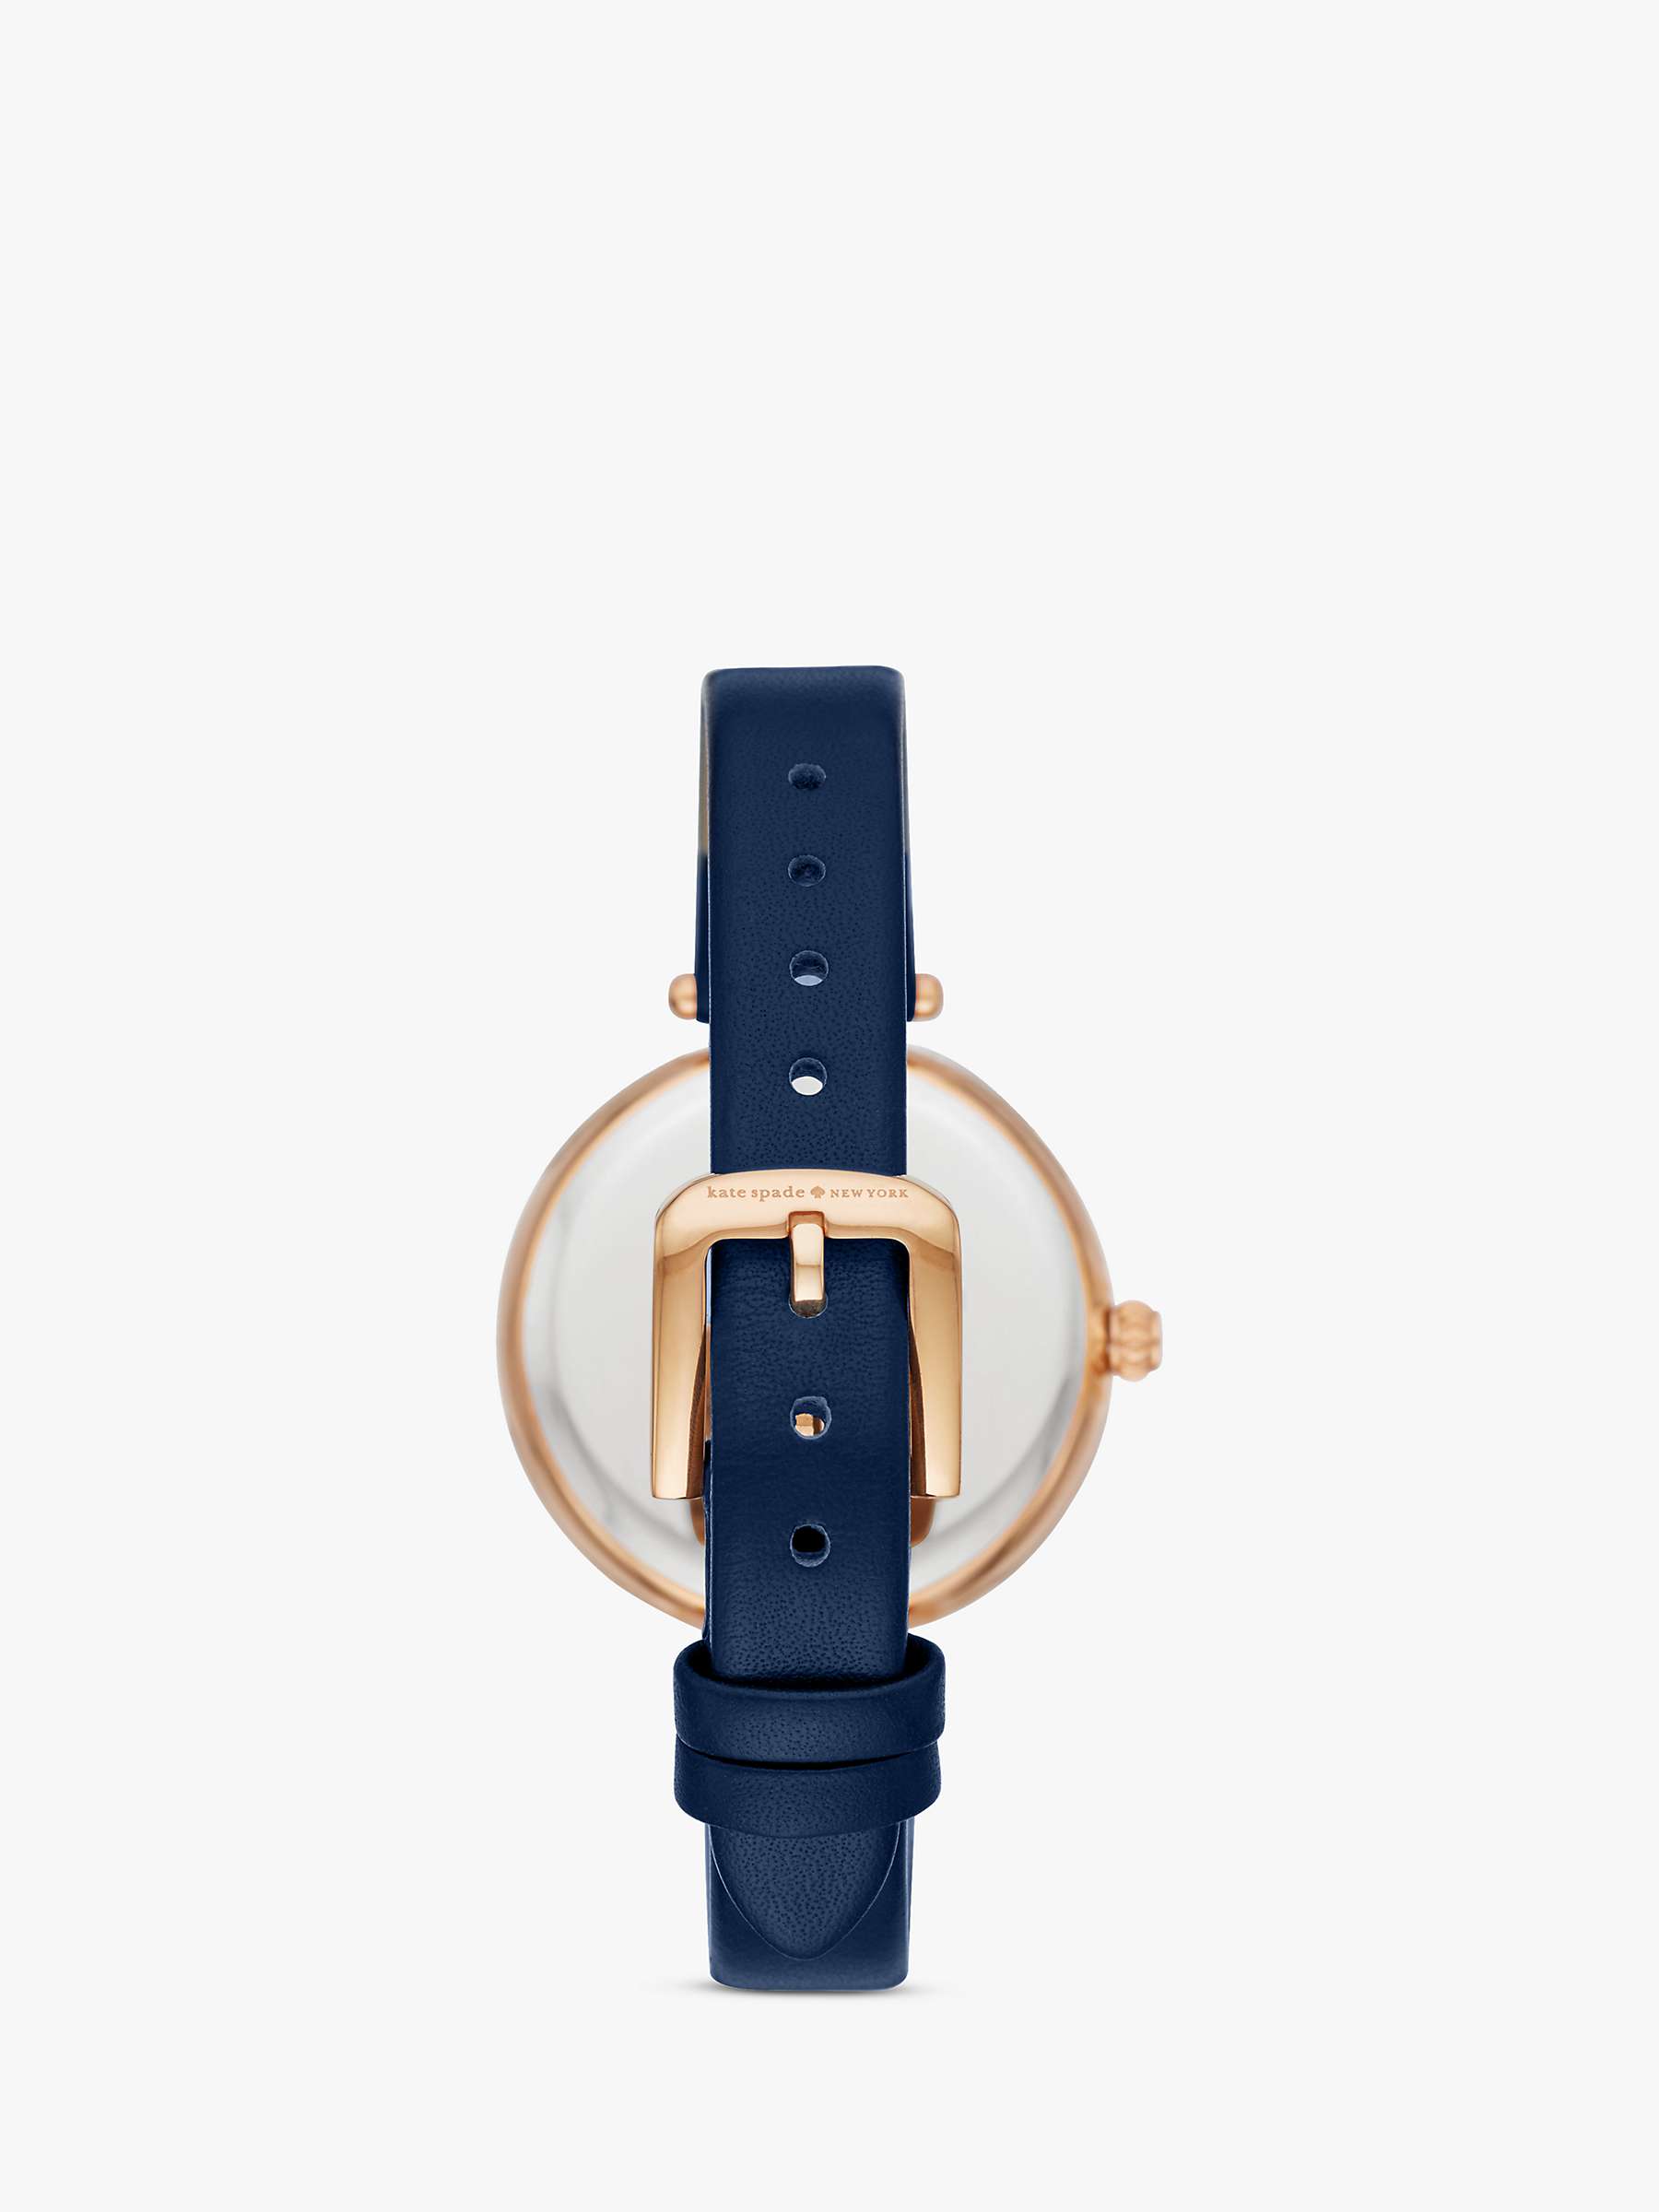 kate spade new york Holland Leather Strap Watch, Blue KSW1157 at John Lewis  & Partners